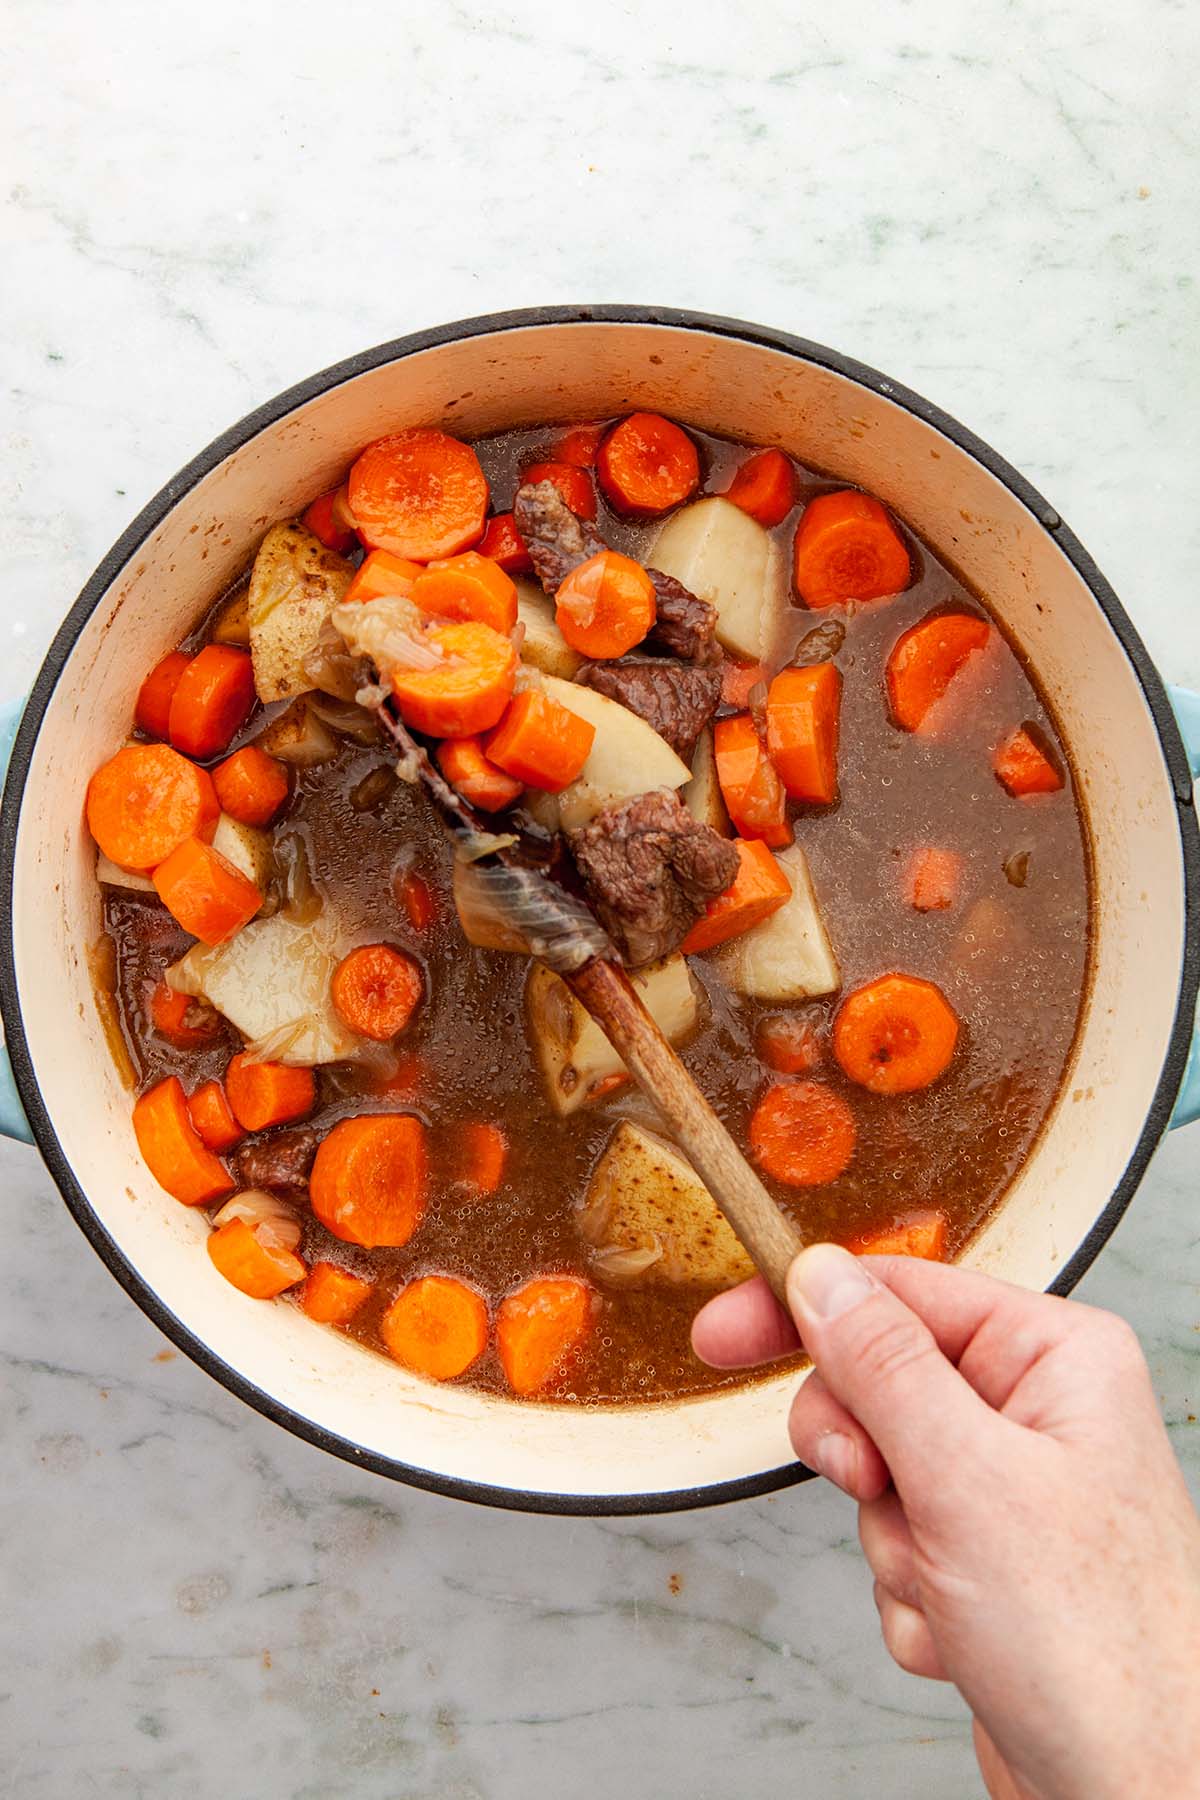 A hand using a wooden spoon to stir together cooked beef cubes, beef broth, and onions with raw potatoes and carrots.